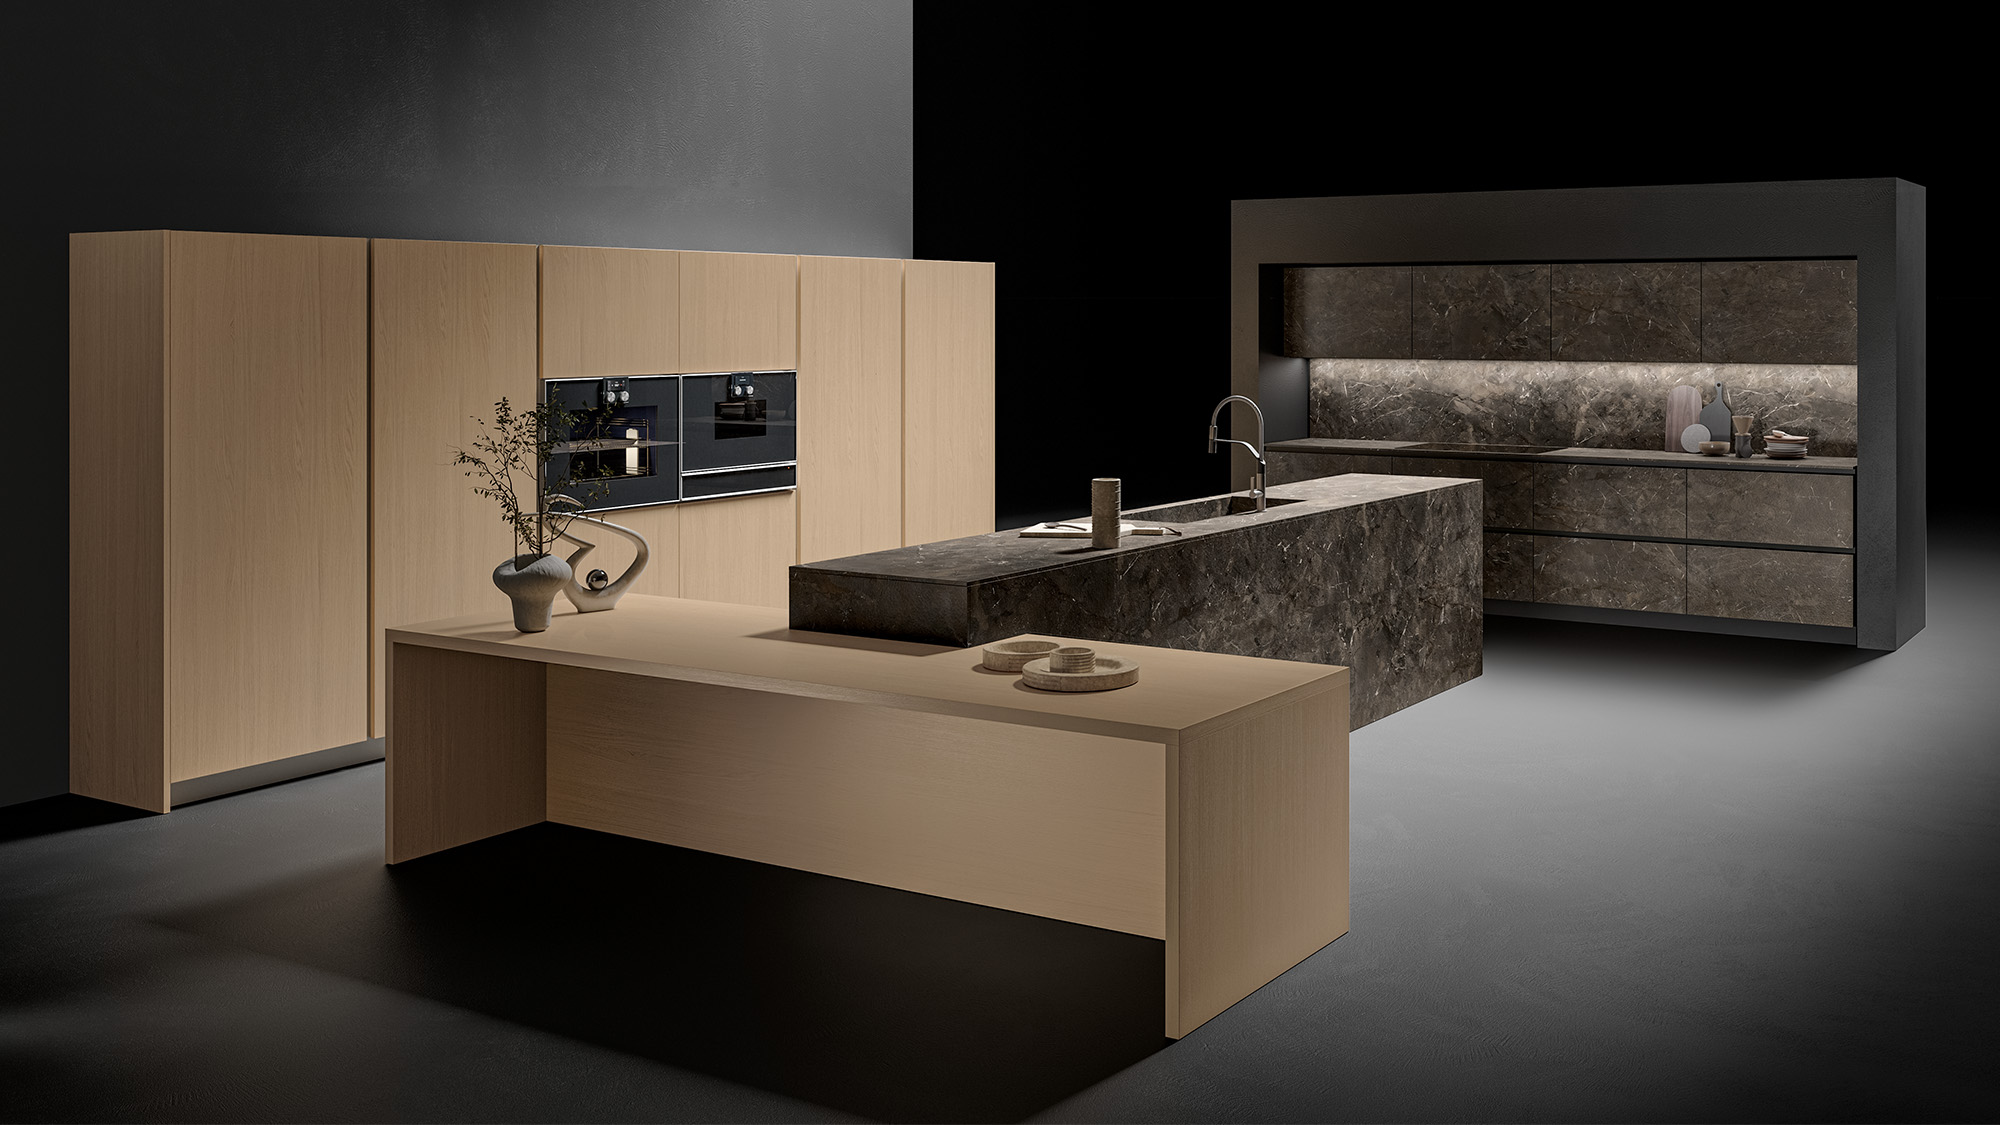 Modular kitchen with double island, columns and ceramic portal | CX 14 | CX Frame System | Comprex